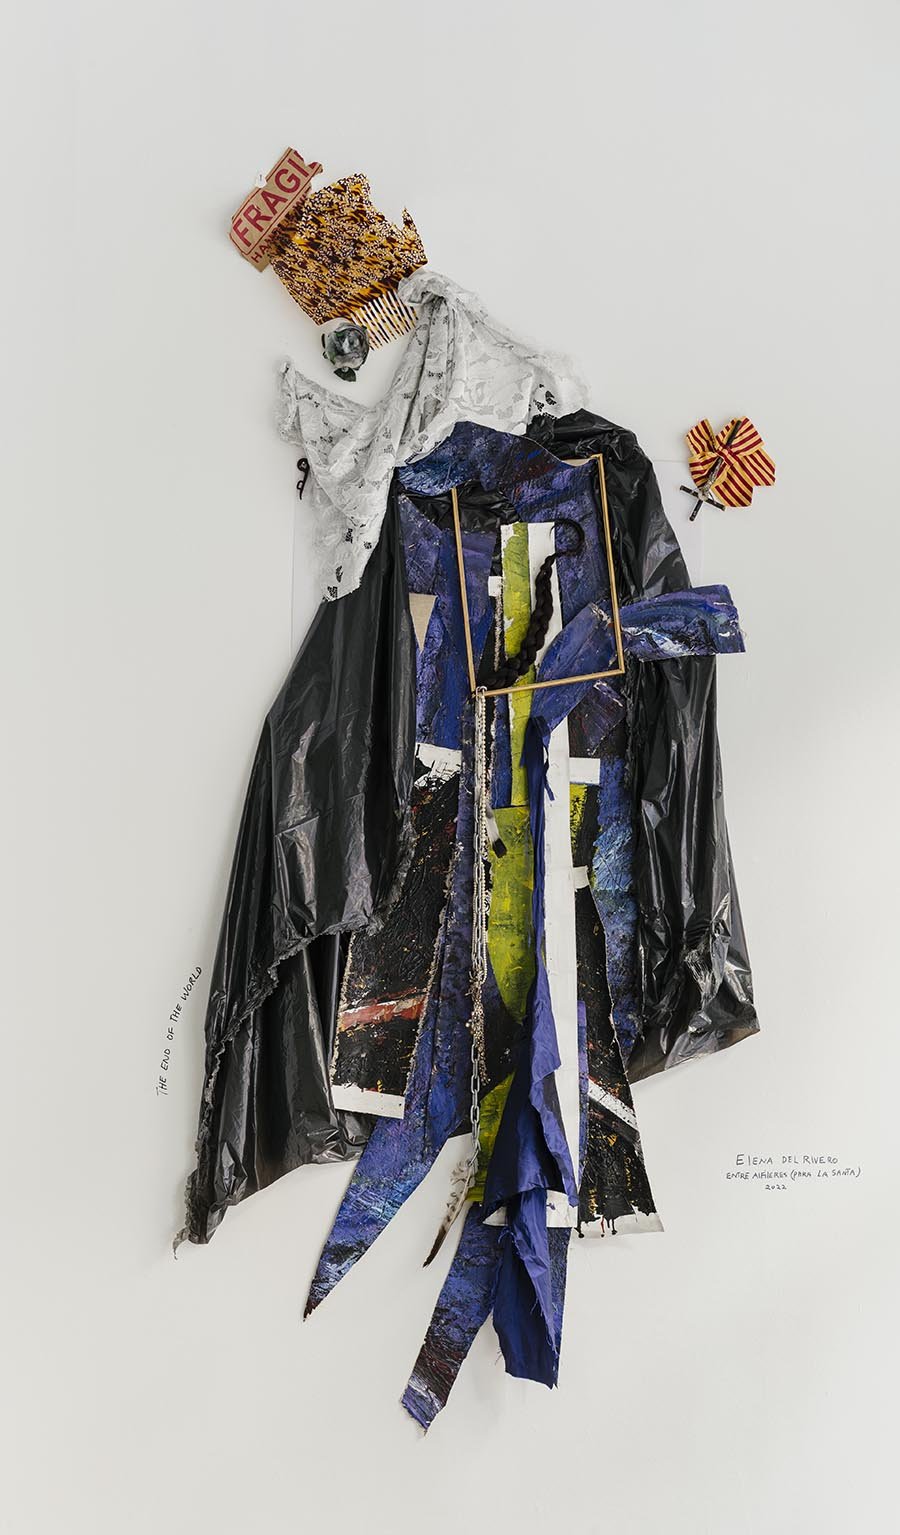   Entre Alfileres  Assemblage with fragments of Elena’s paintings from the 80’s, her mother peineta, found objects, lace mantilla,  And various materials Unframed  190x86cms  